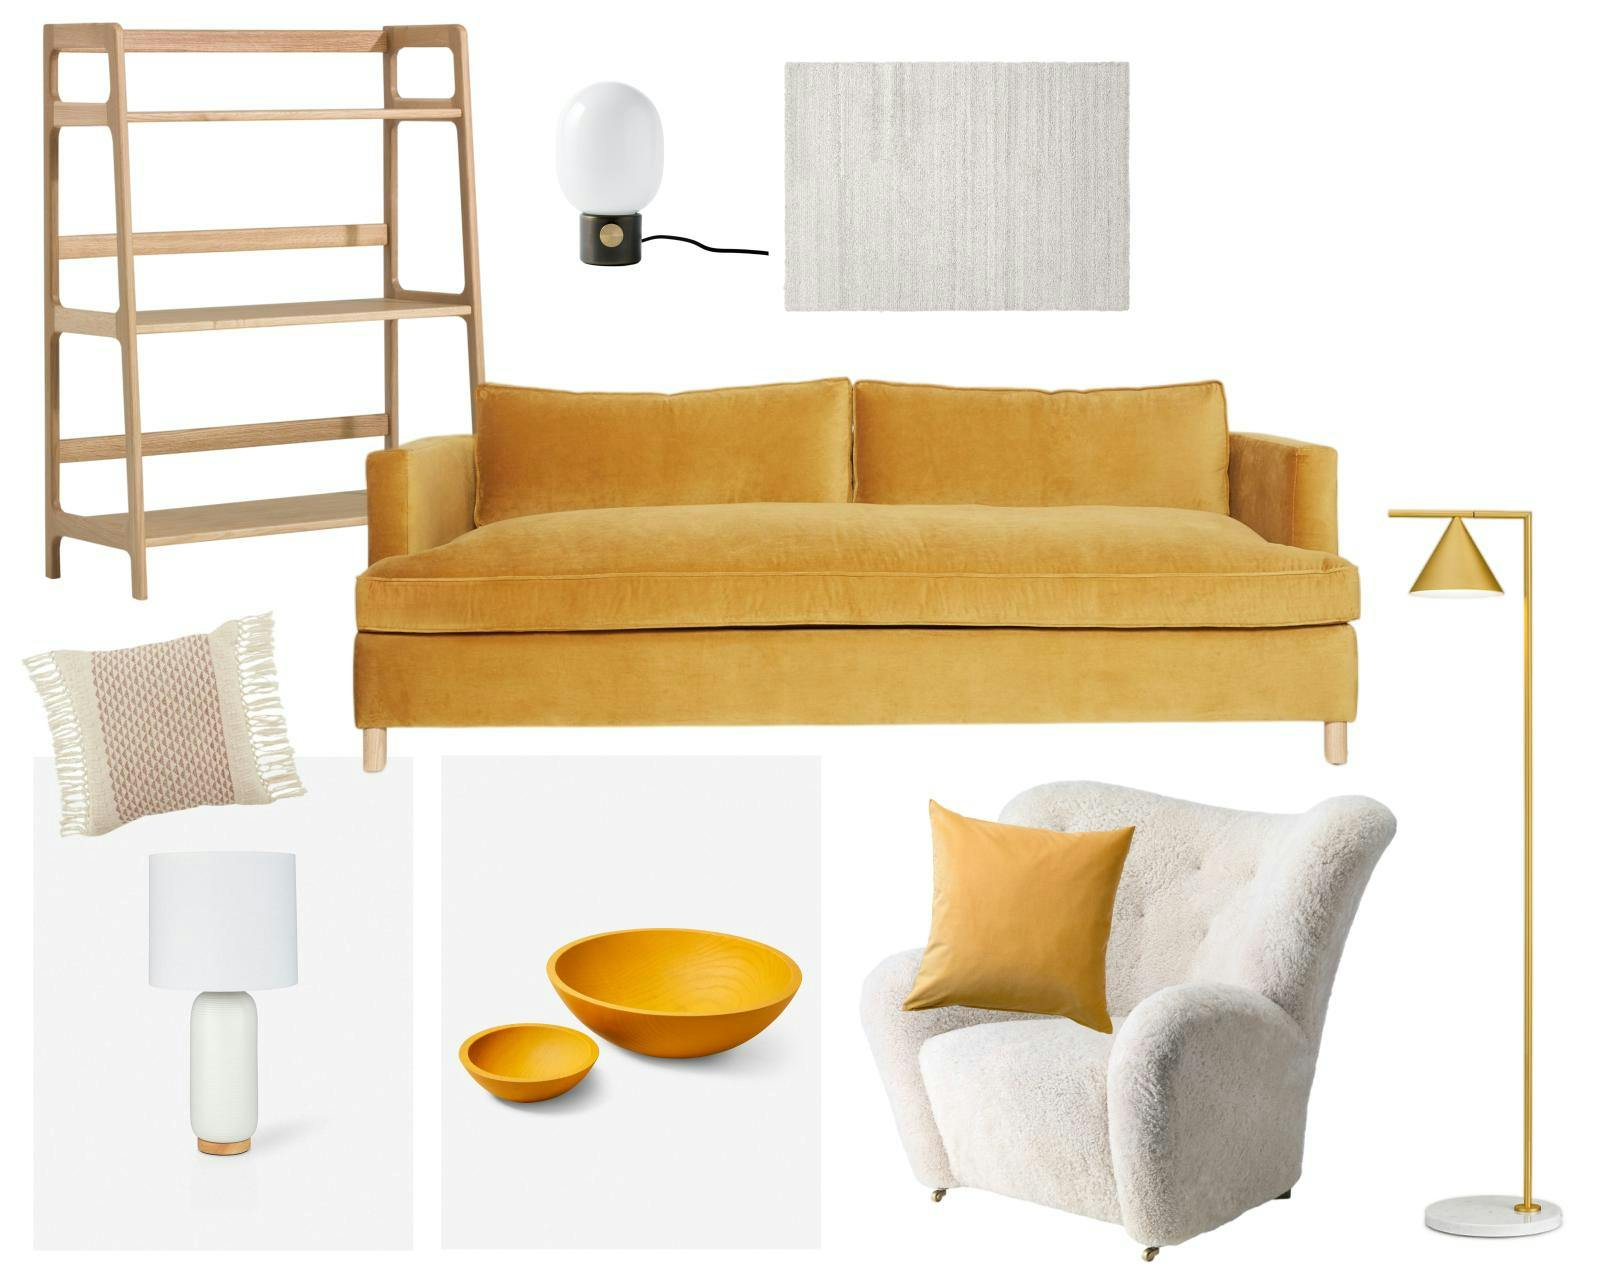 Mood board with 12 products